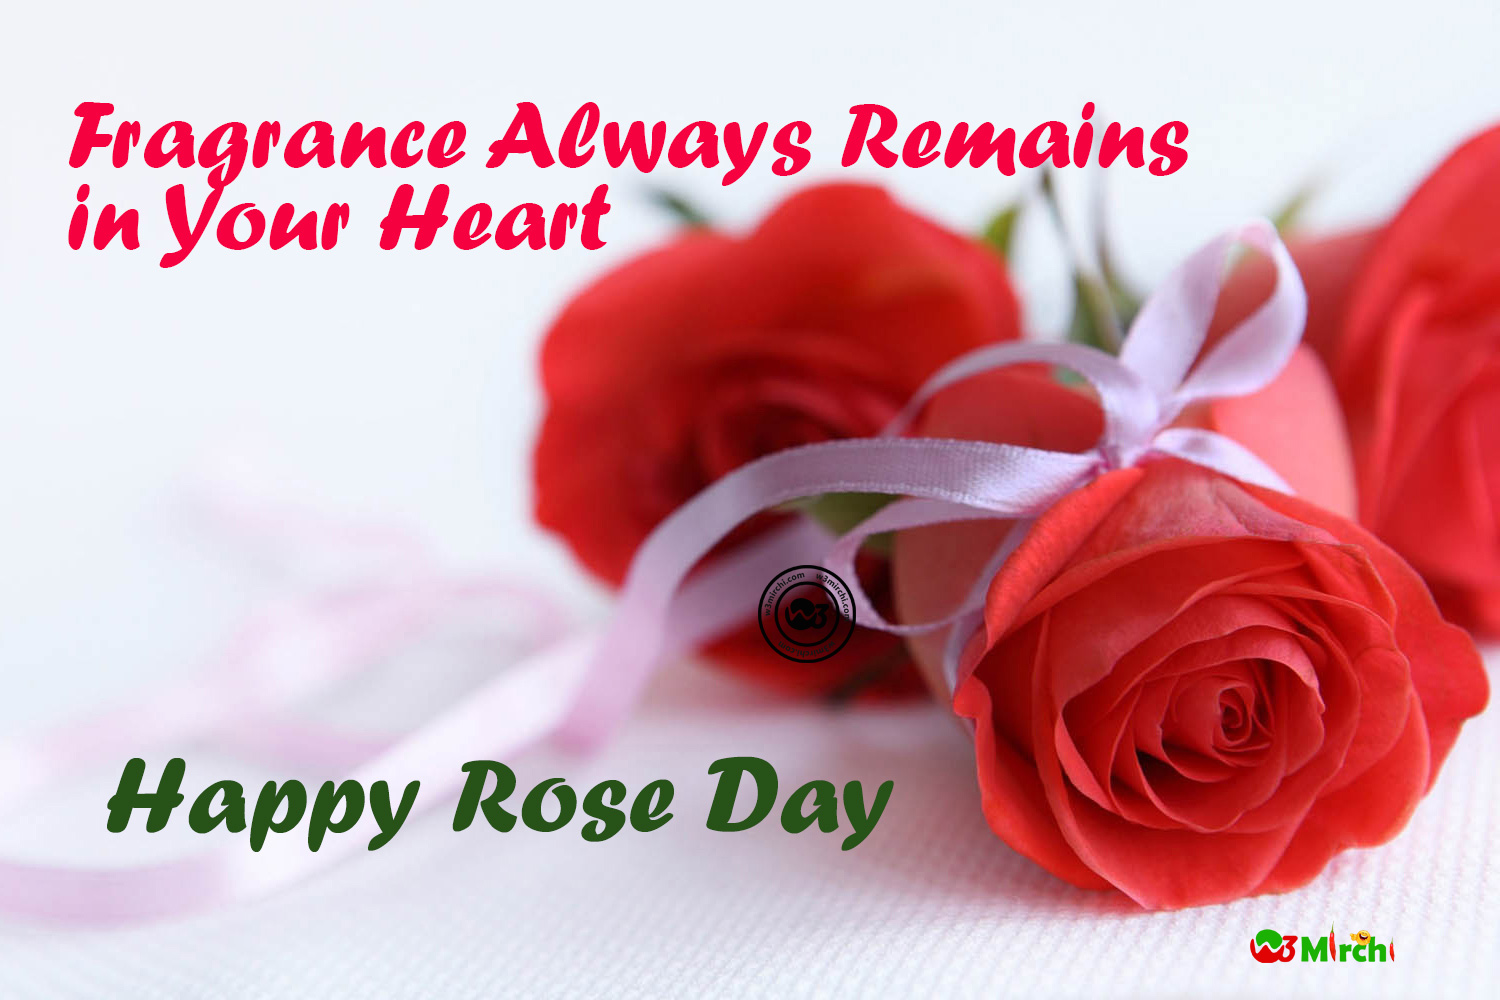 Happy Rose Day - Rose Day Quotes